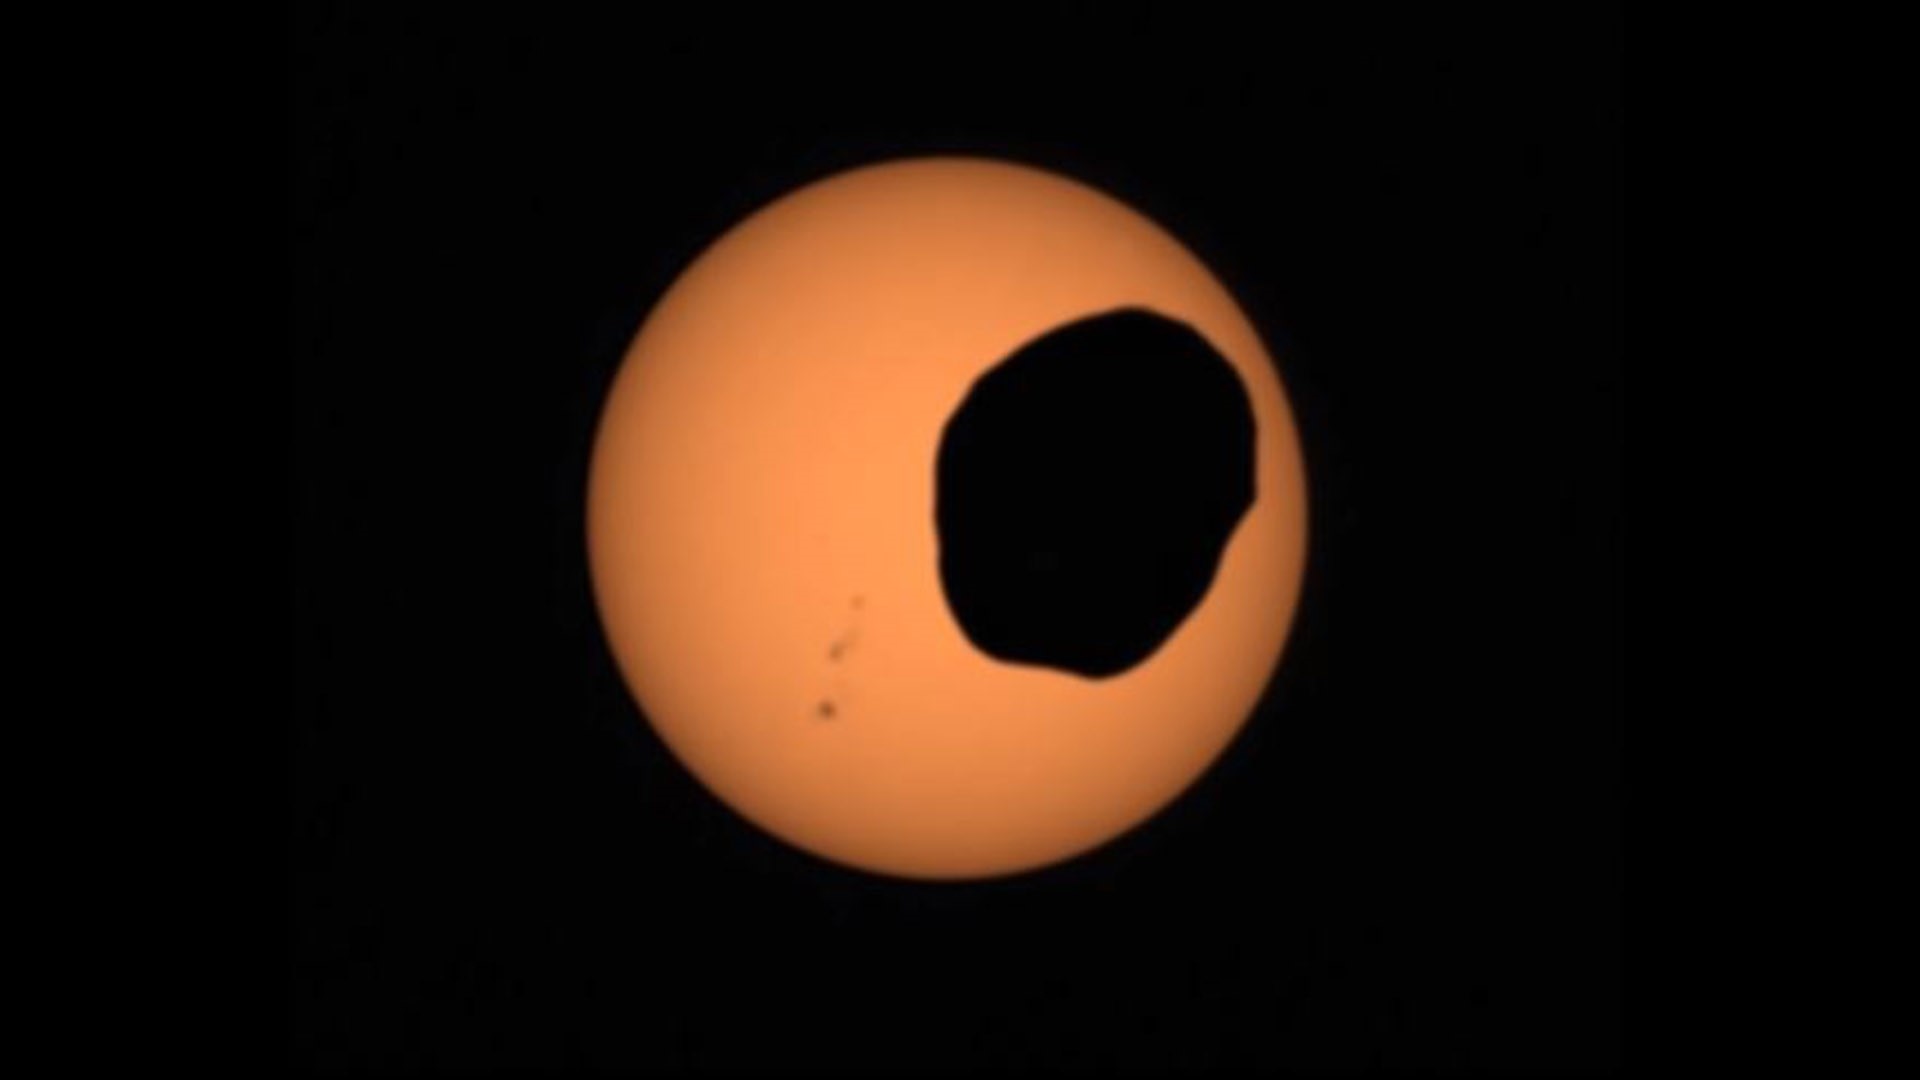 The Mars Perseverance rover captured video of the moon Phobos eclipsing the sun. It can help astronomers determine when Phobos may one day crash into the planet.